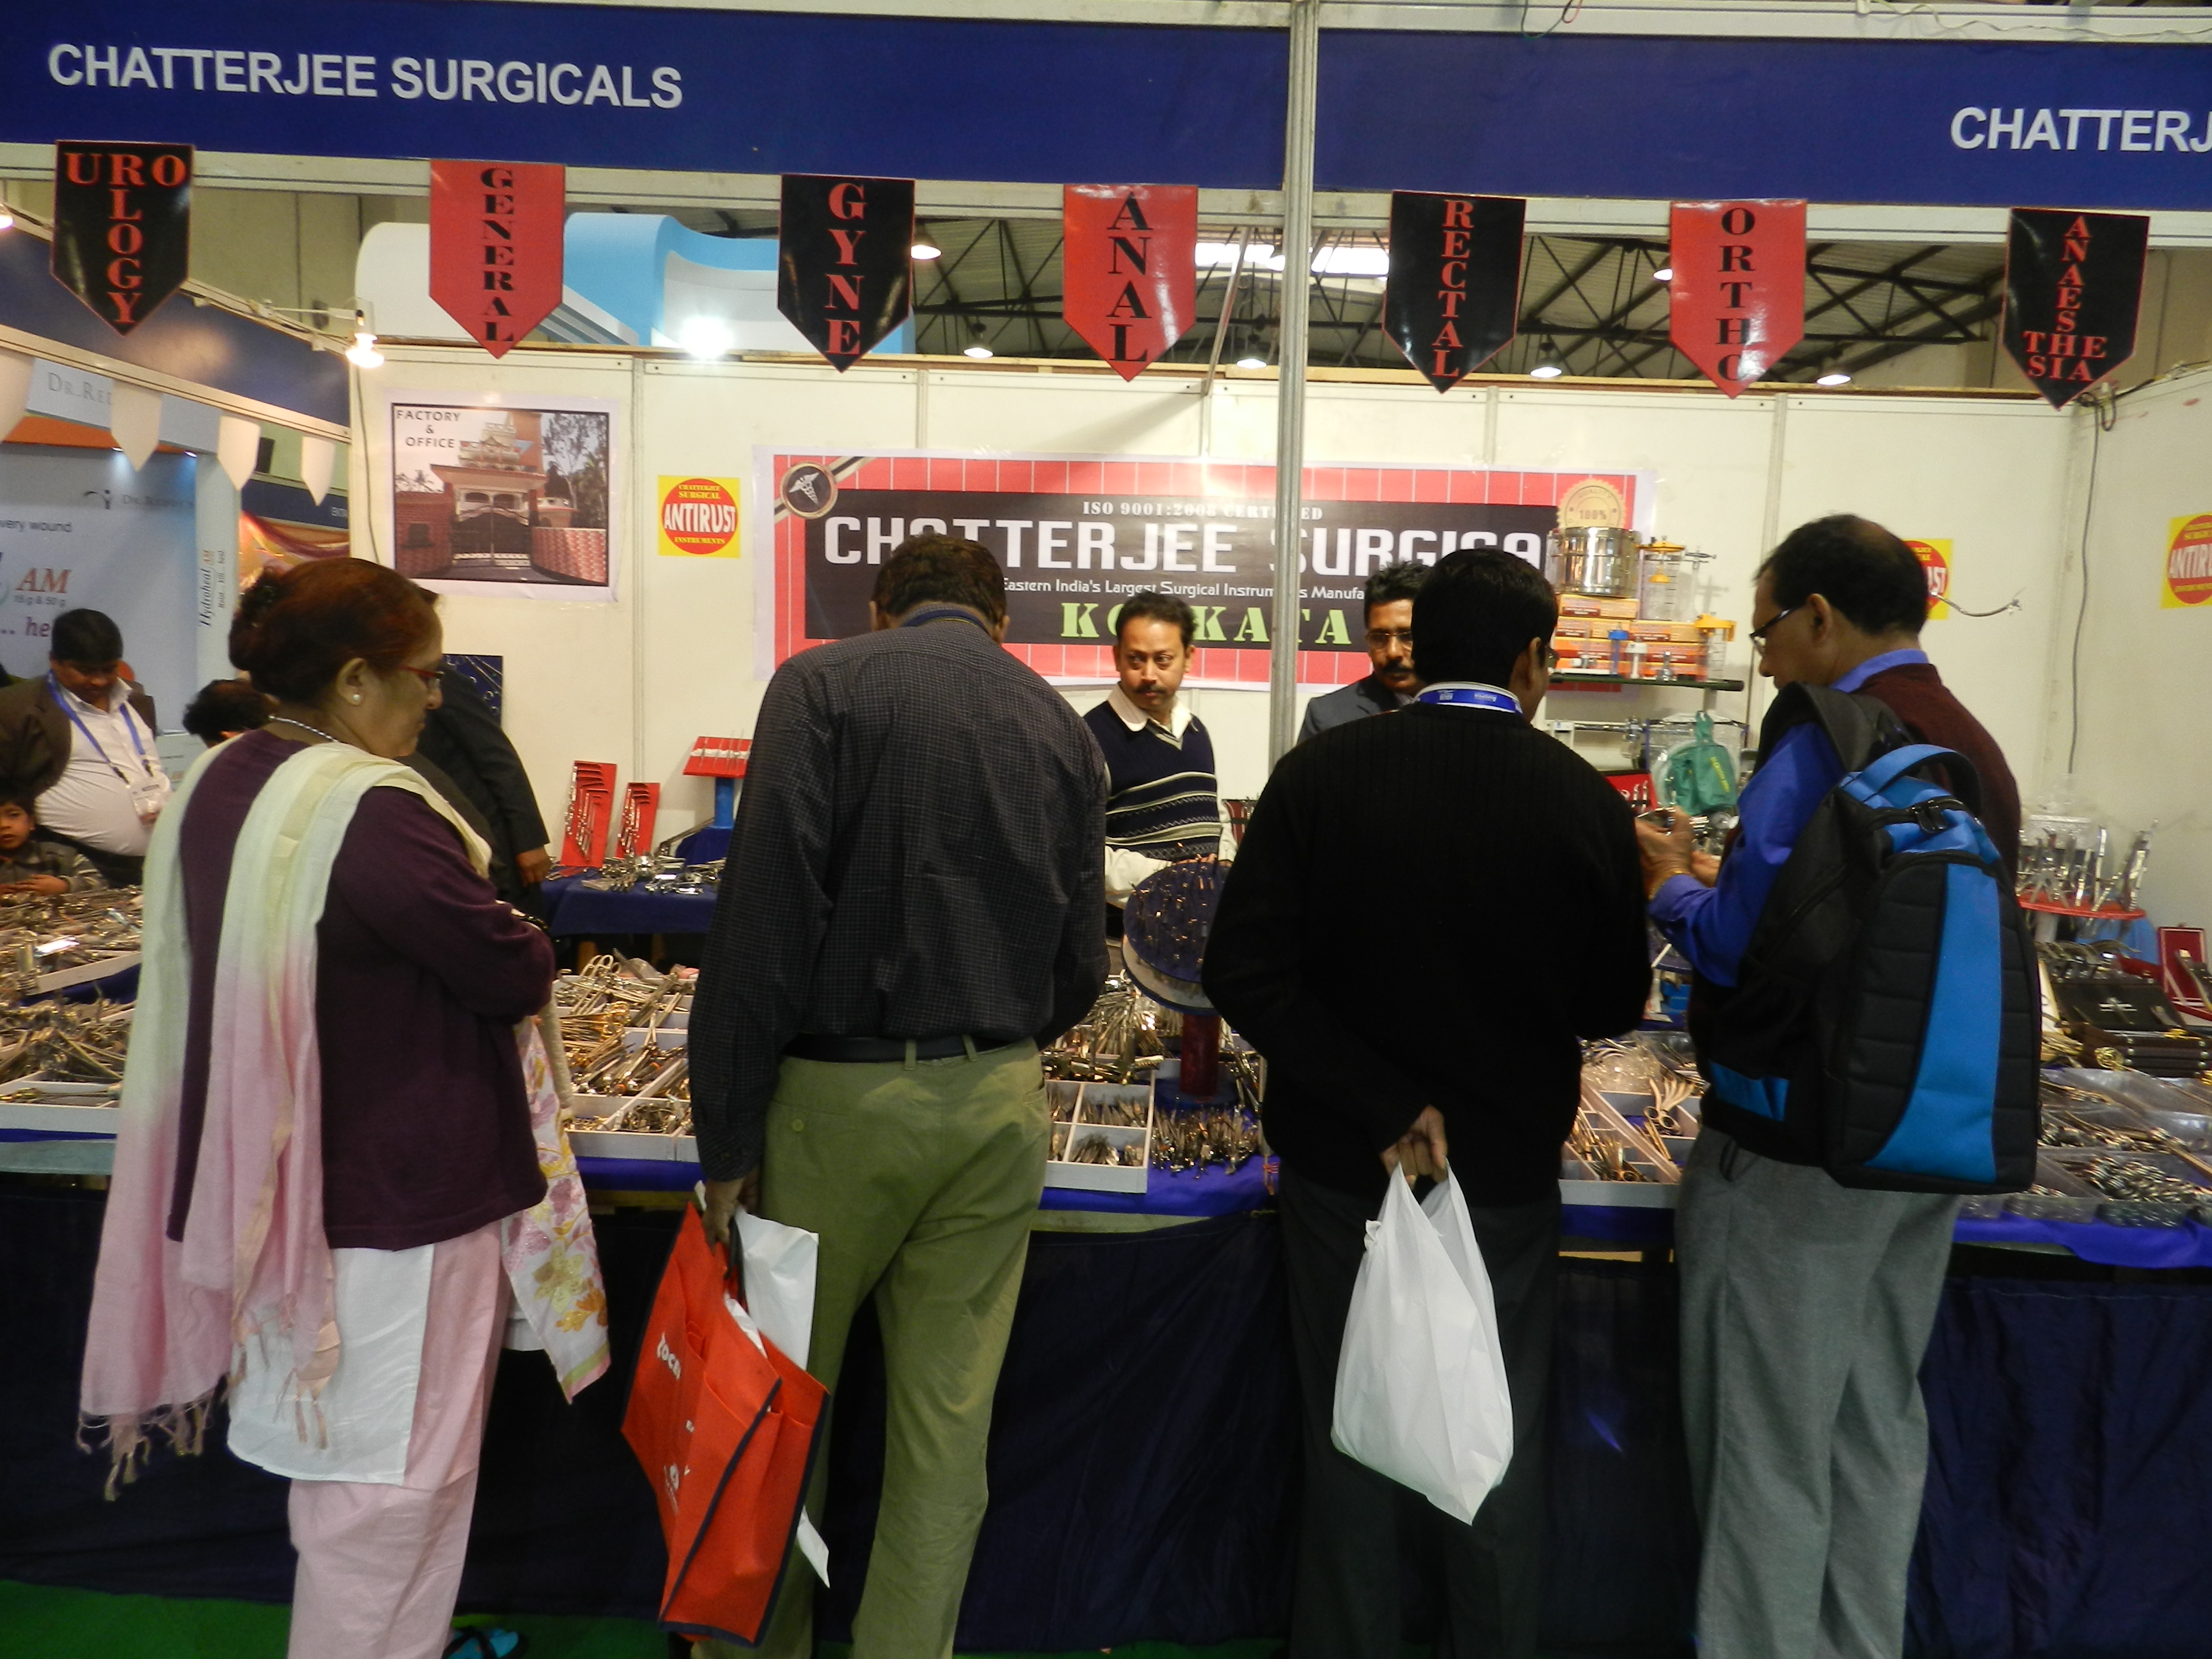 DOCTORS VISITING CHATTERJEE SURGICAL STALL 